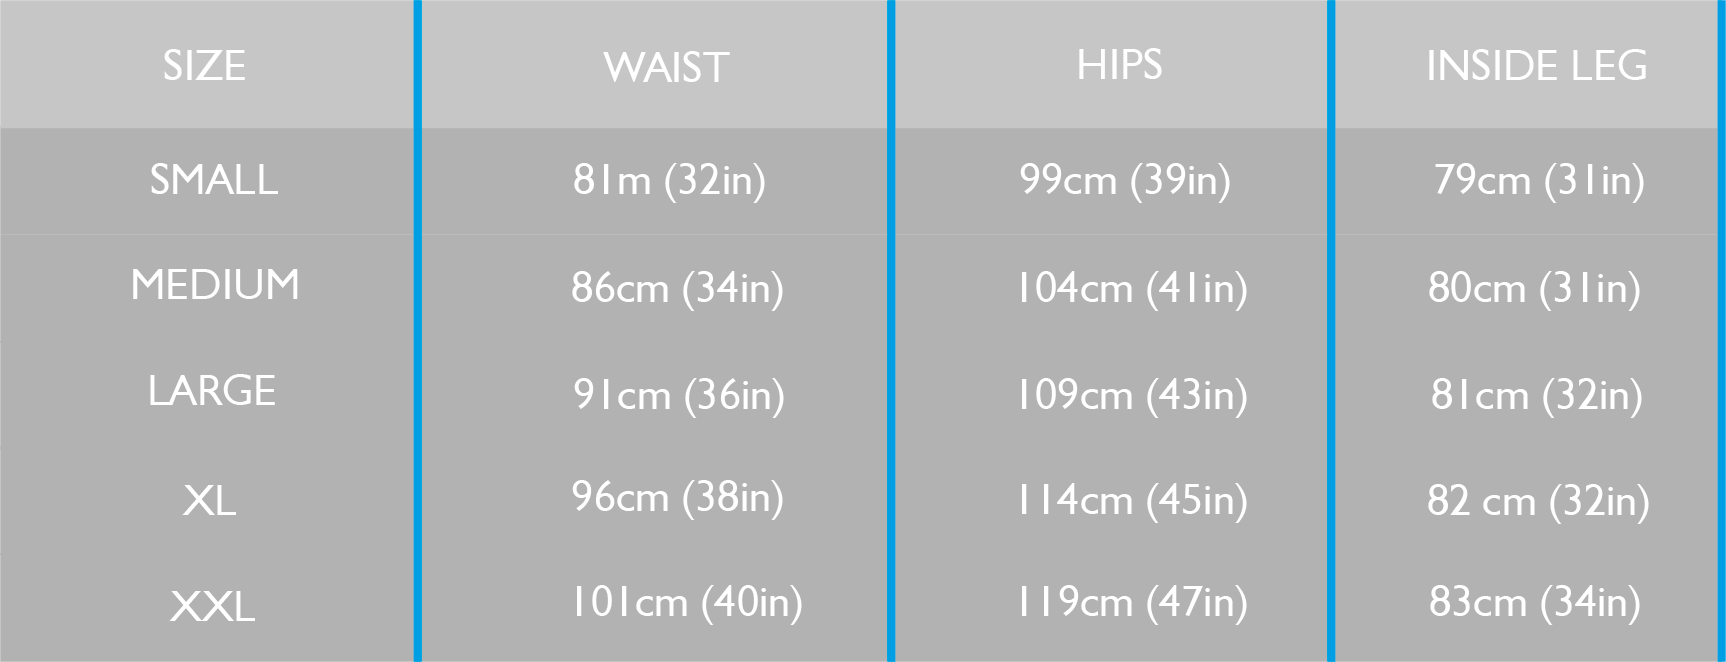 Mens Bottoms Size Guide